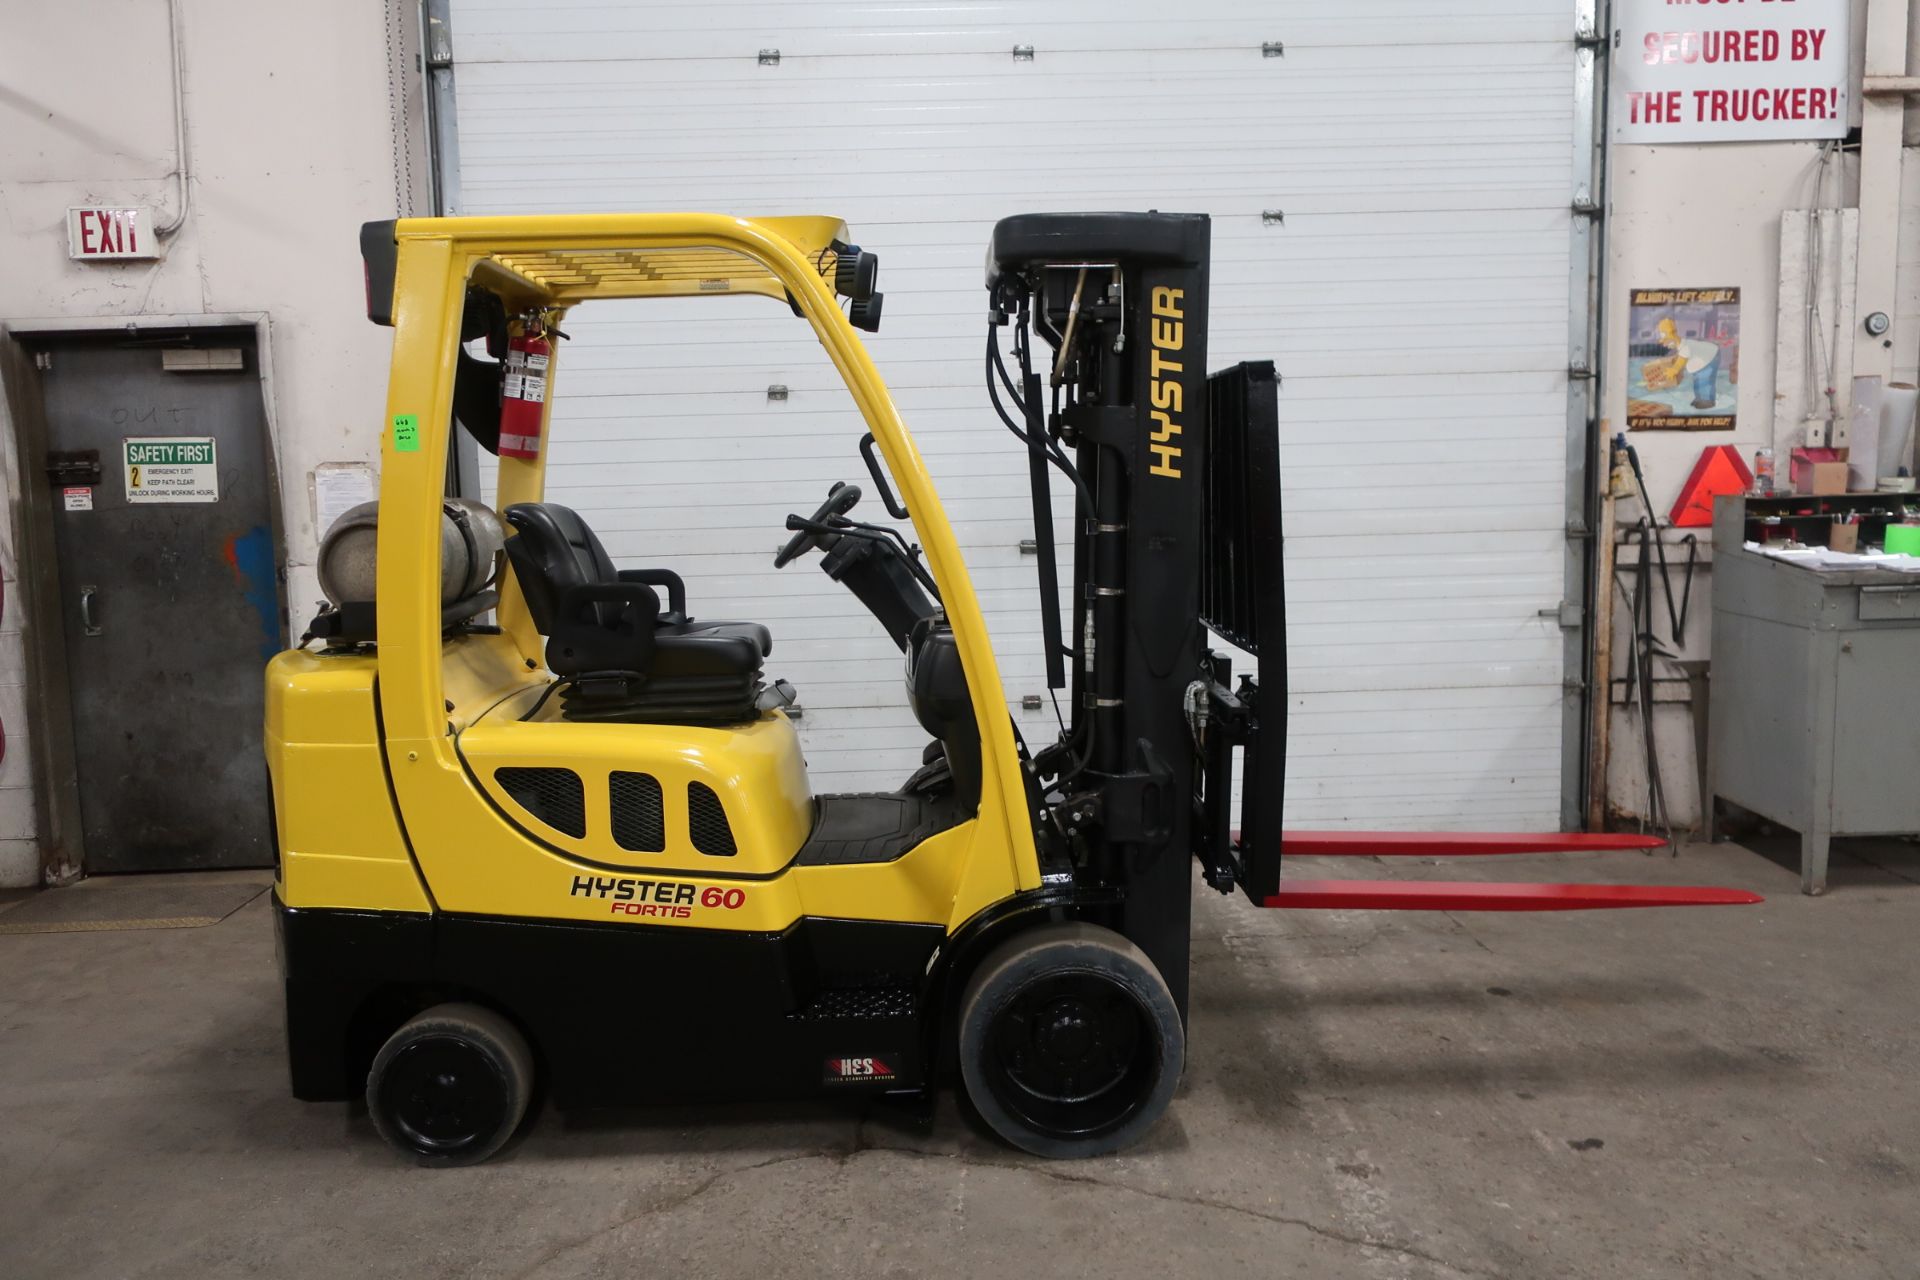 FREE CUSTOMS - 2012 Hyster 6000lbs Capacity Forklift with 4-stage mast - LPG (propane) with